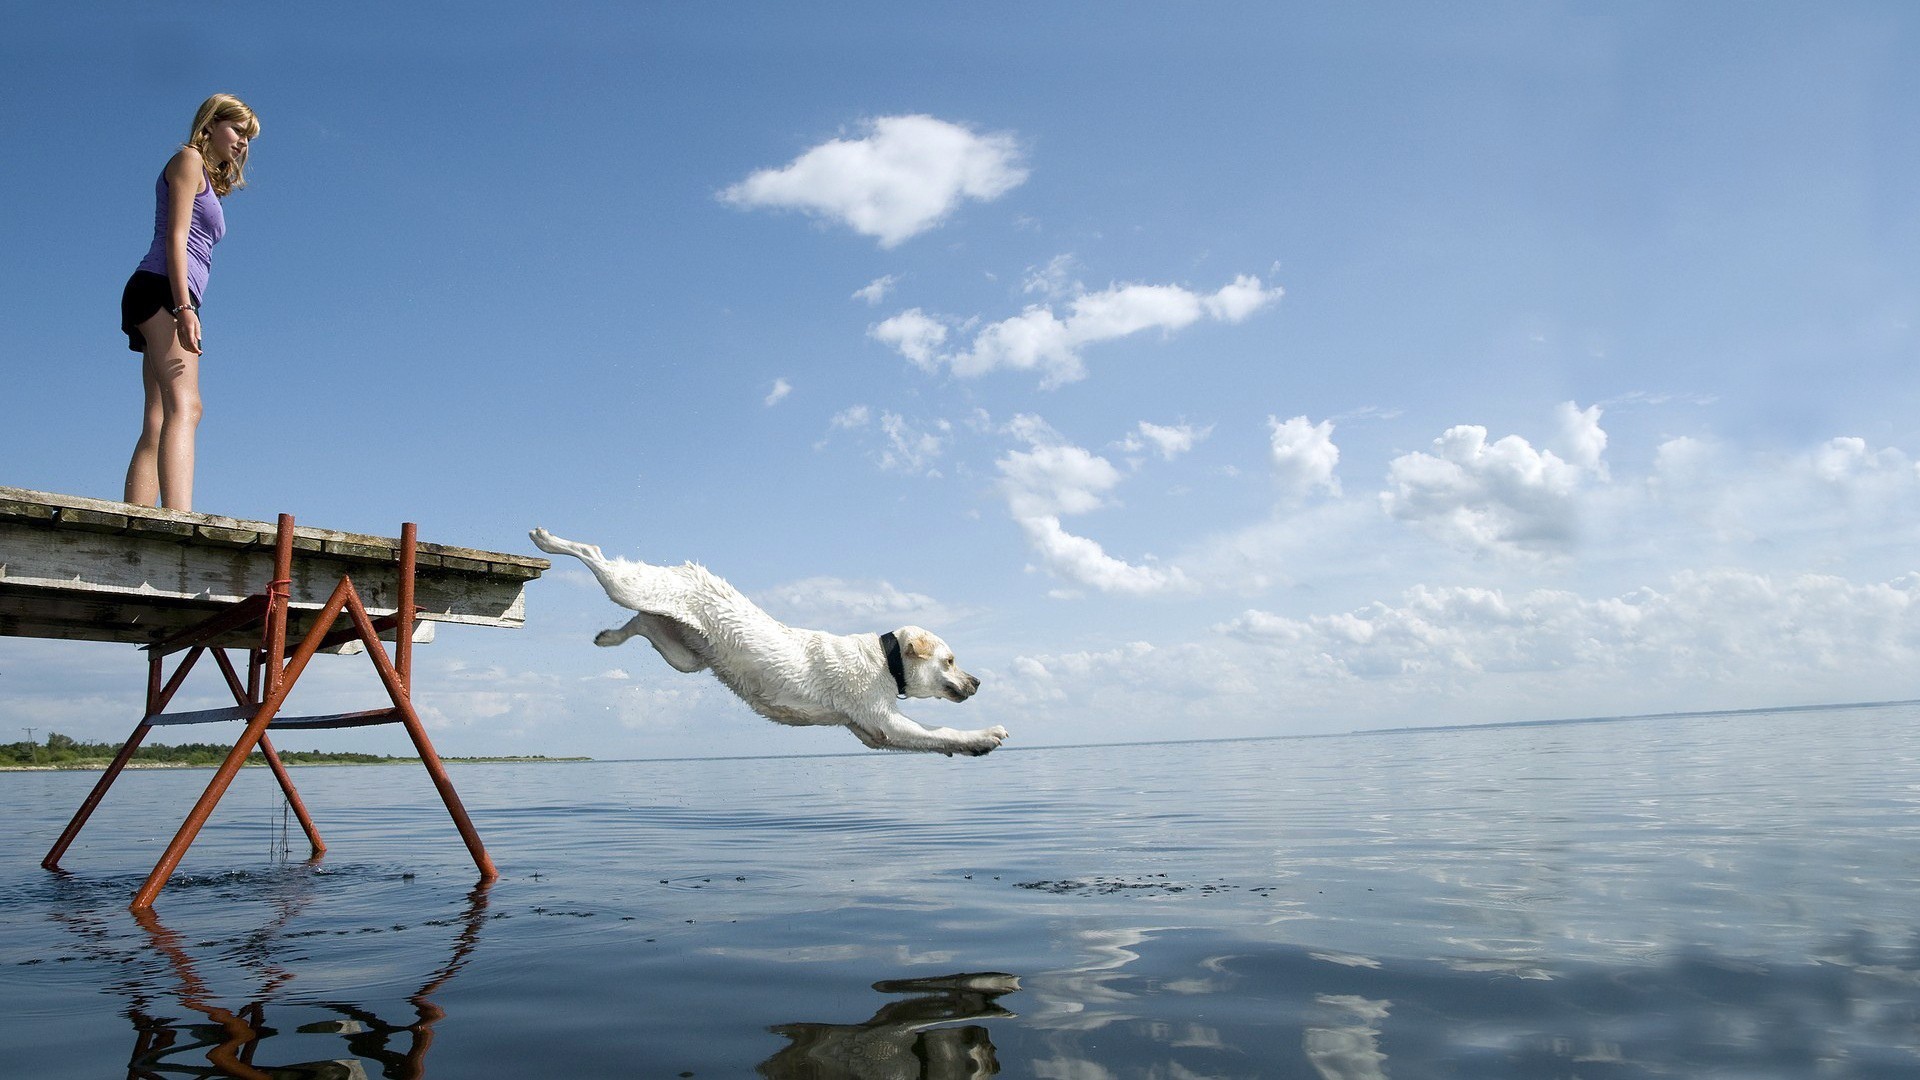 Dog jumping in the water